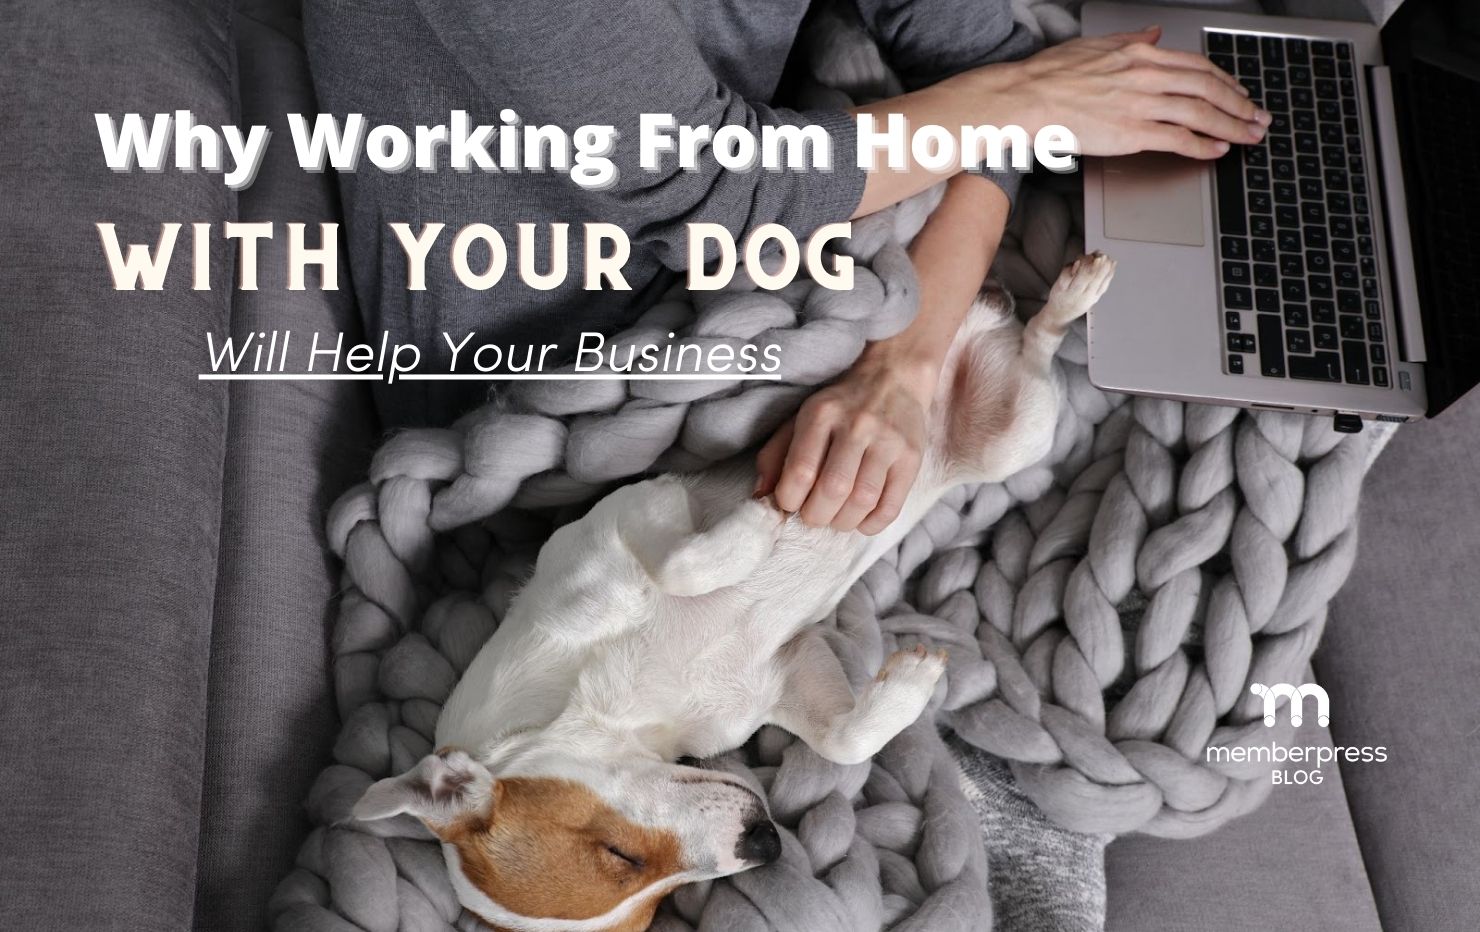 A dog sits beside its working owner. Text reads "Why Working From Home With Your Dog Will Help Your Business". The MemberPress blogs logo is present.